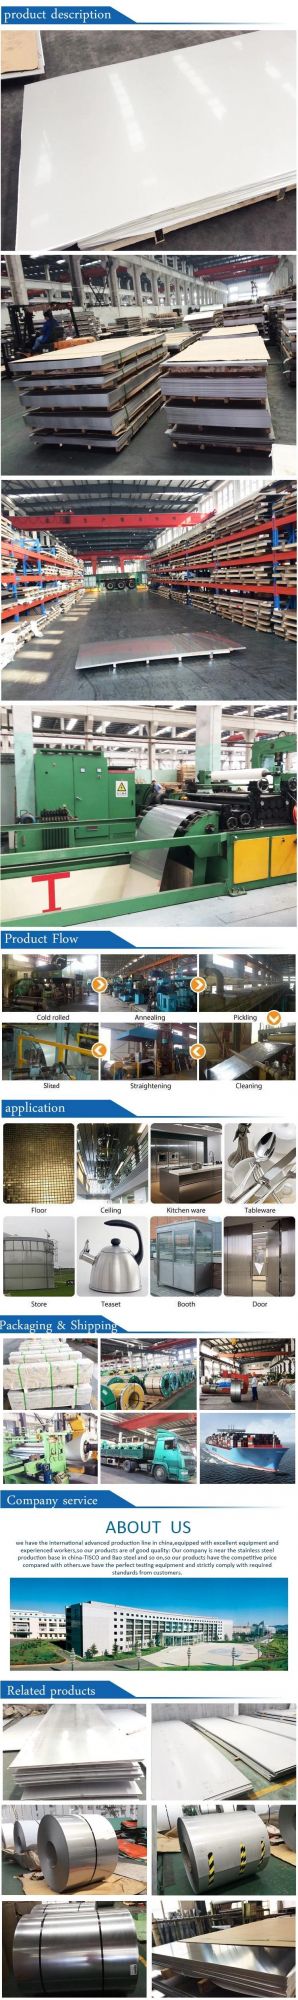 High Quality ASTM Stainless Steel Sheets 304L 304 321 316L 310S 2205 430 Stainless Steel Sheet Prices